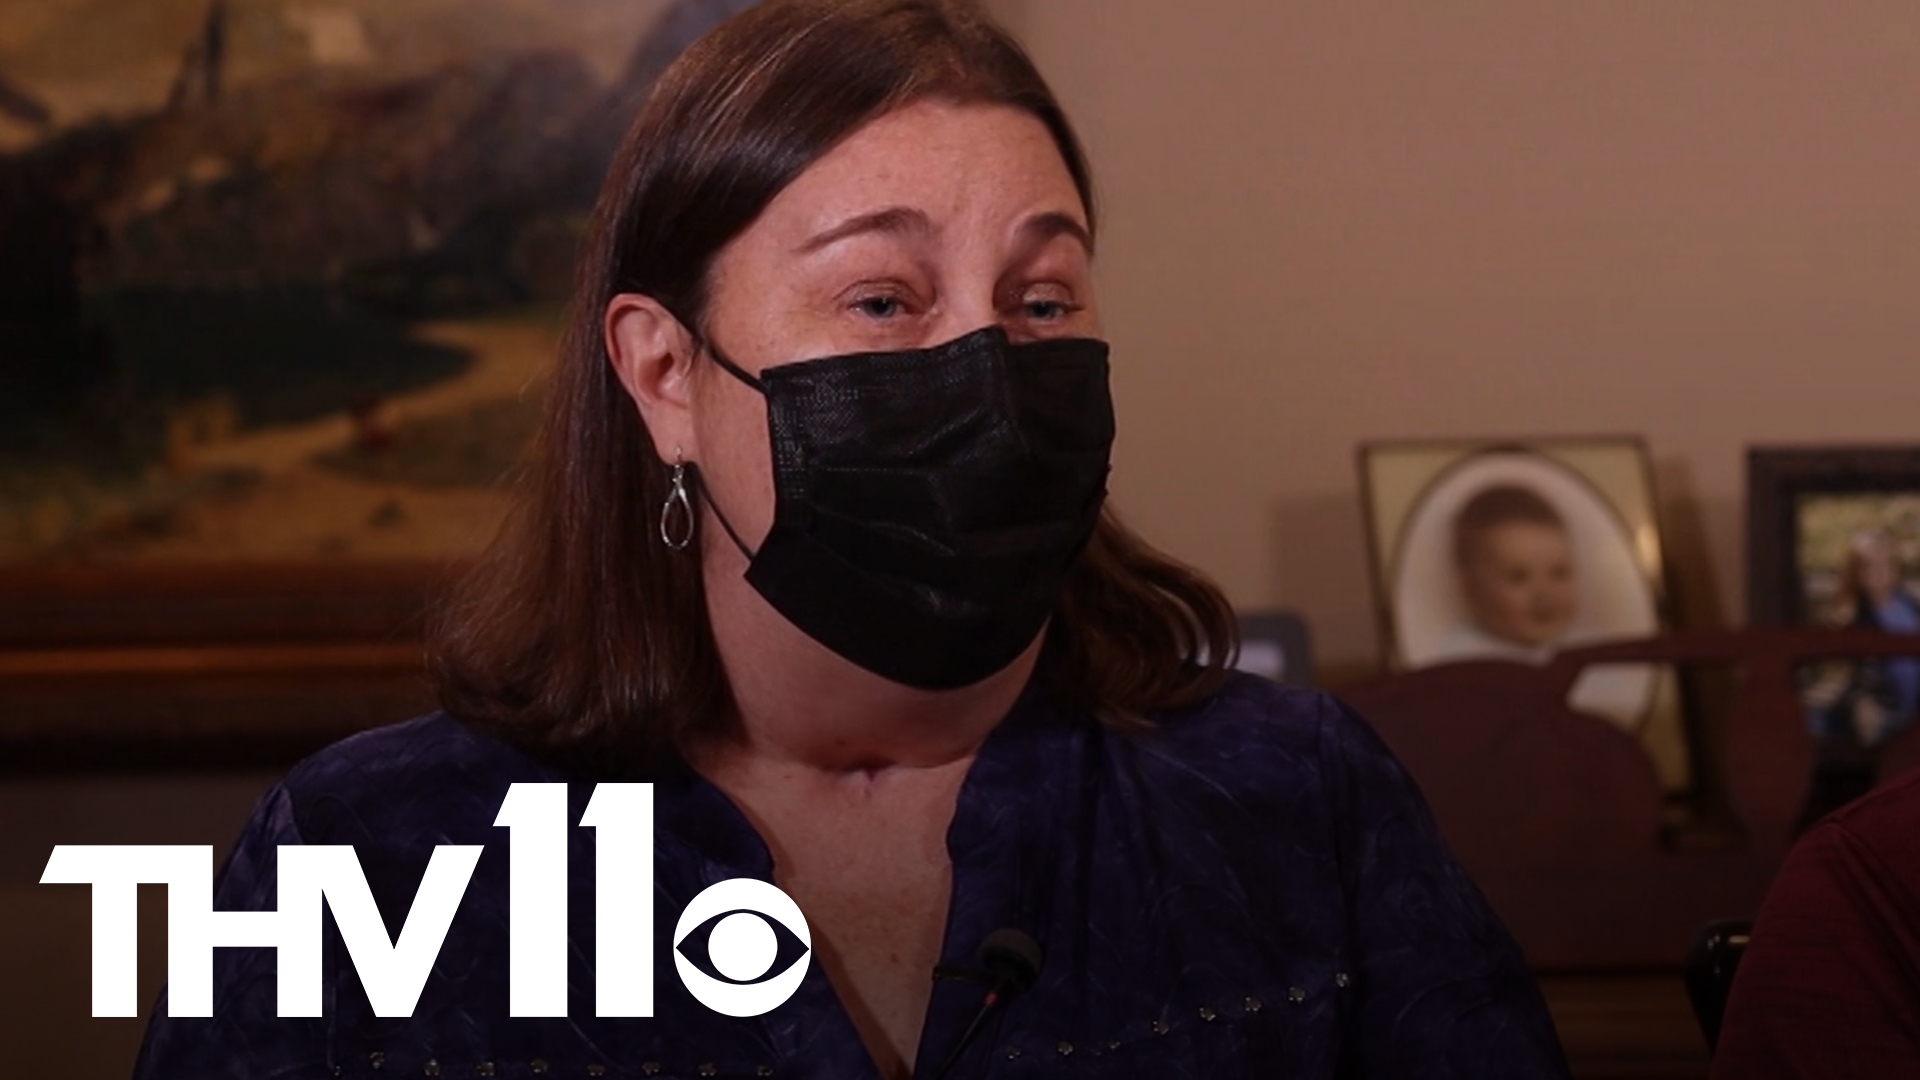 Doctors gave Chris Mareen a 1% chance of surviving COVID-19. Now she's sharing her months-long journey overcoming the virus.